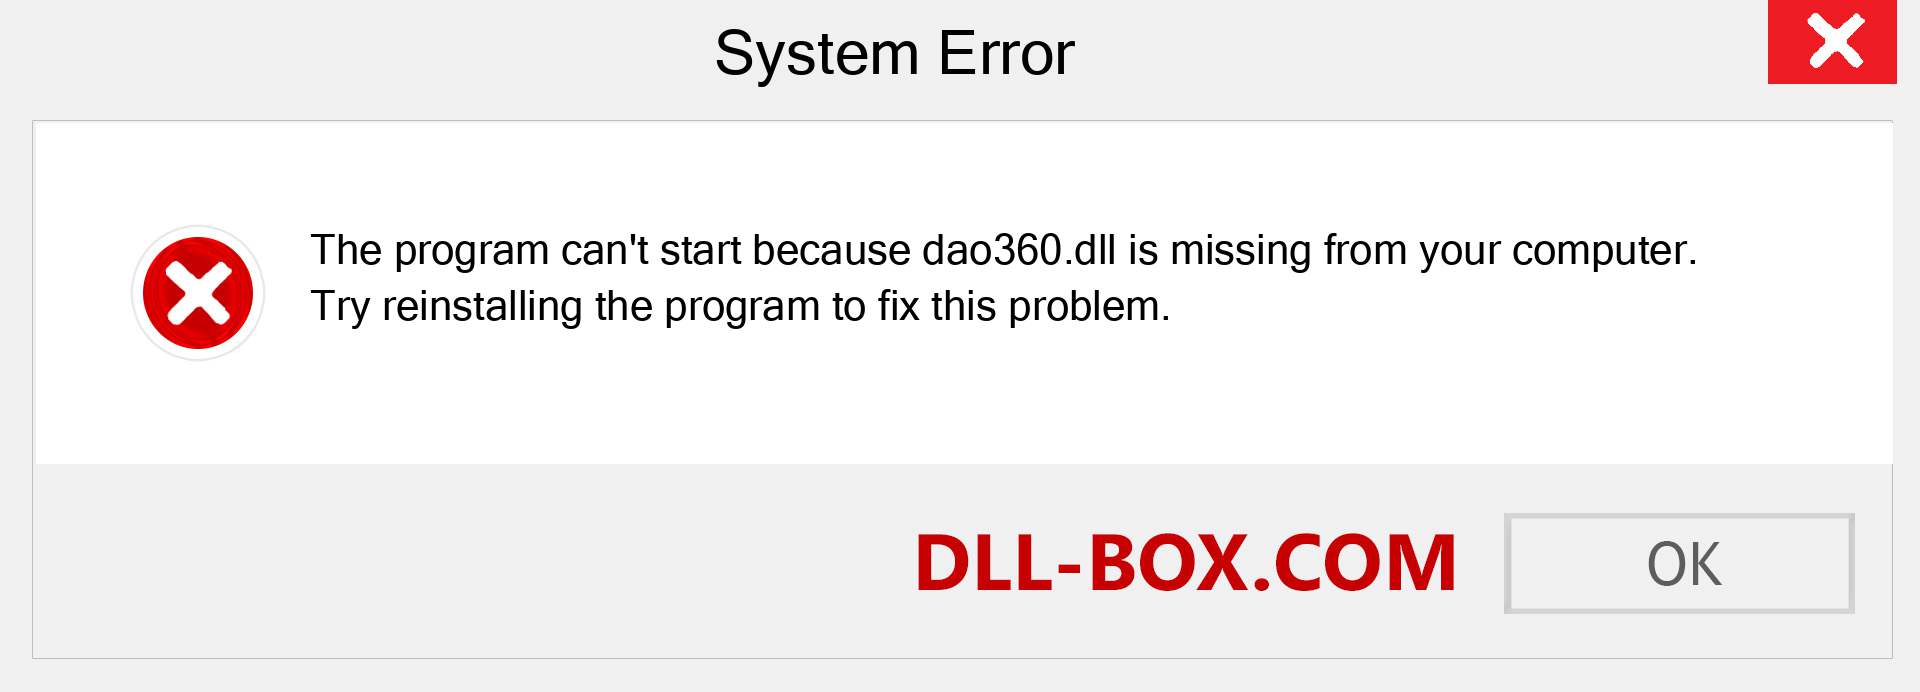  dao360.dll file is missing?. Download for Windows 7, 8, 10 - Fix  dao360 dll Missing Error on Windows, photos, images